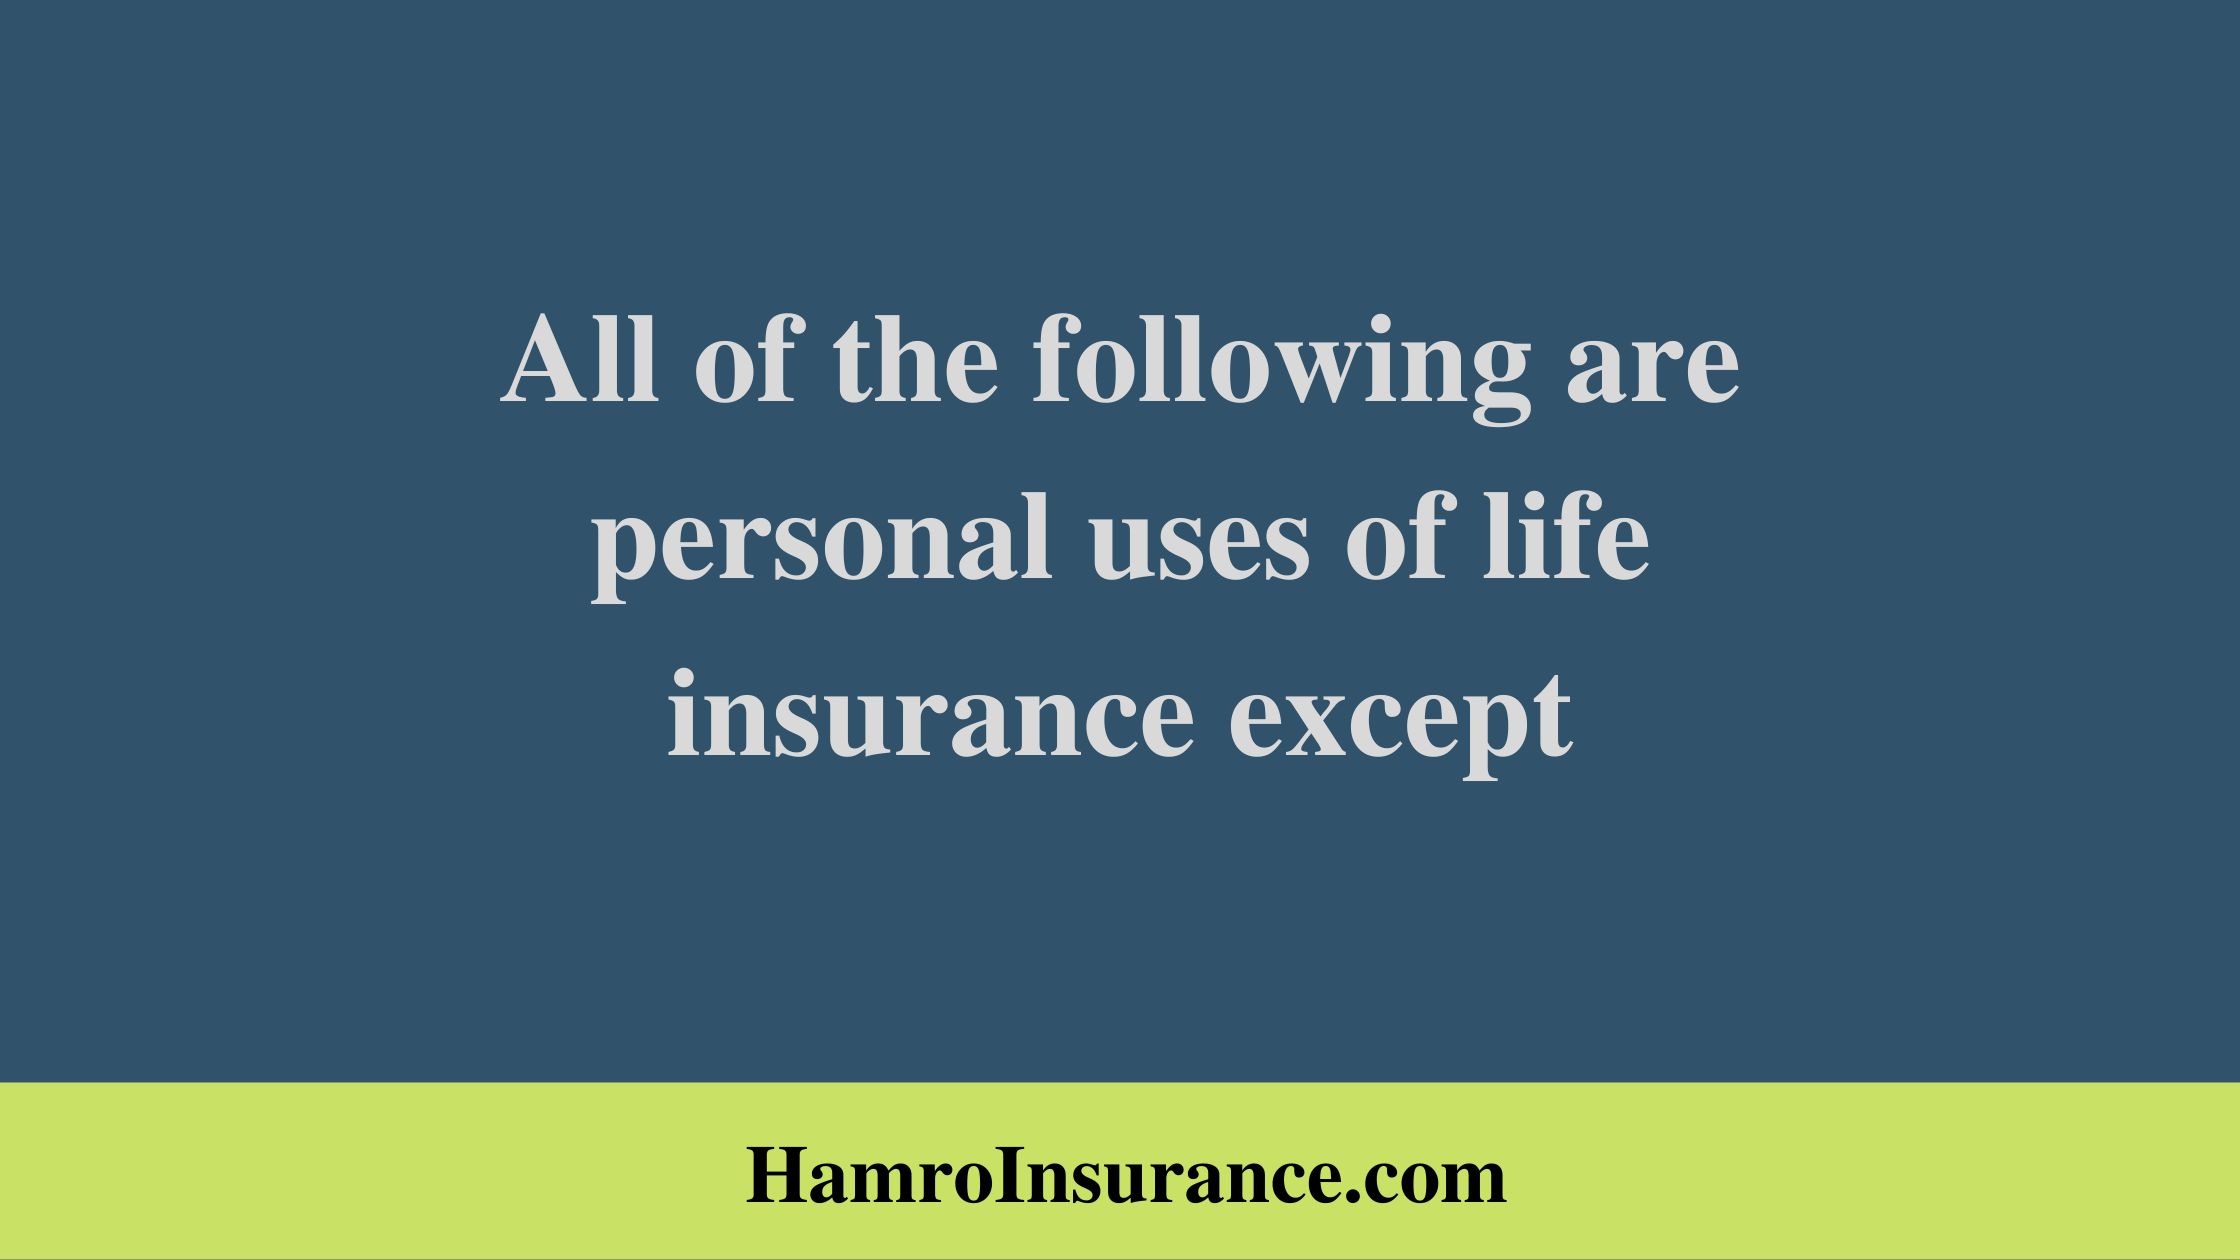 All of the following are personal uses of life insurance except